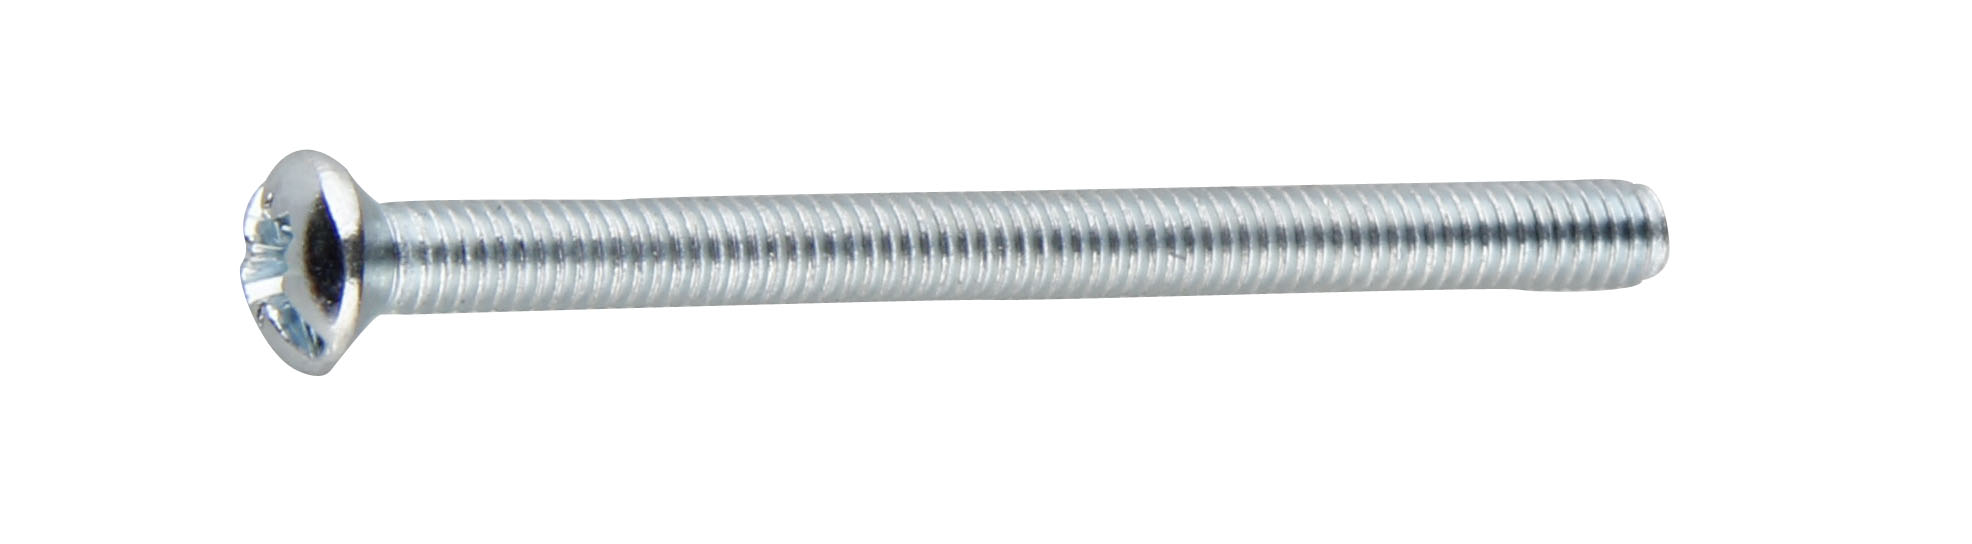 PH and Slotted Oval Countersunk Head Machine Screws